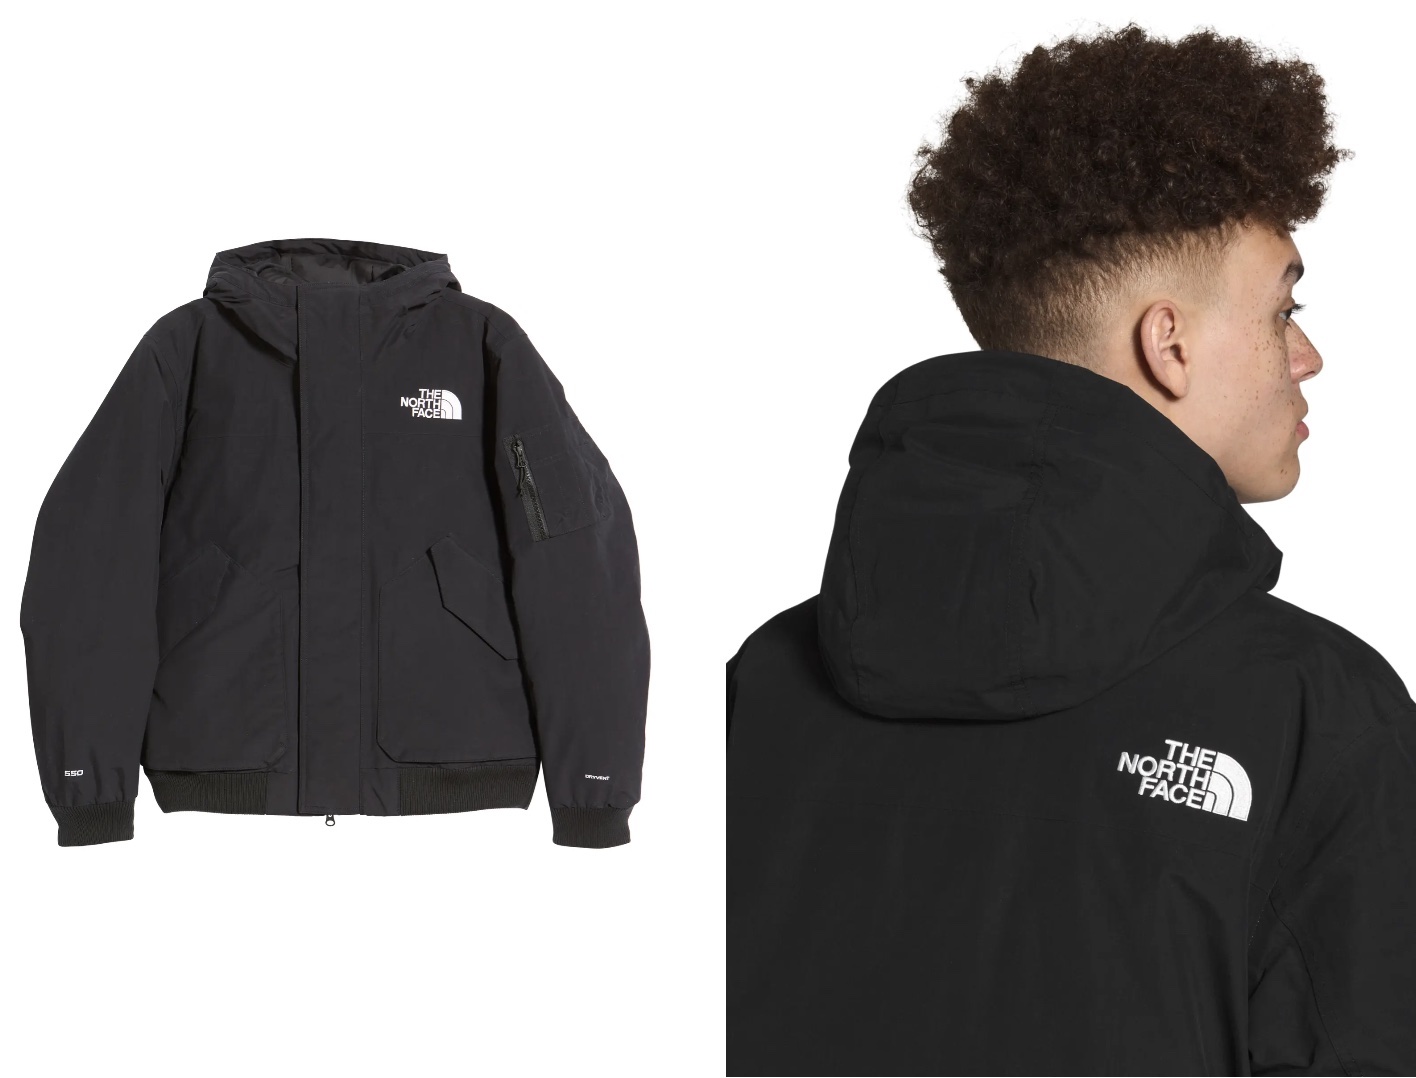 The North Face stover jacket